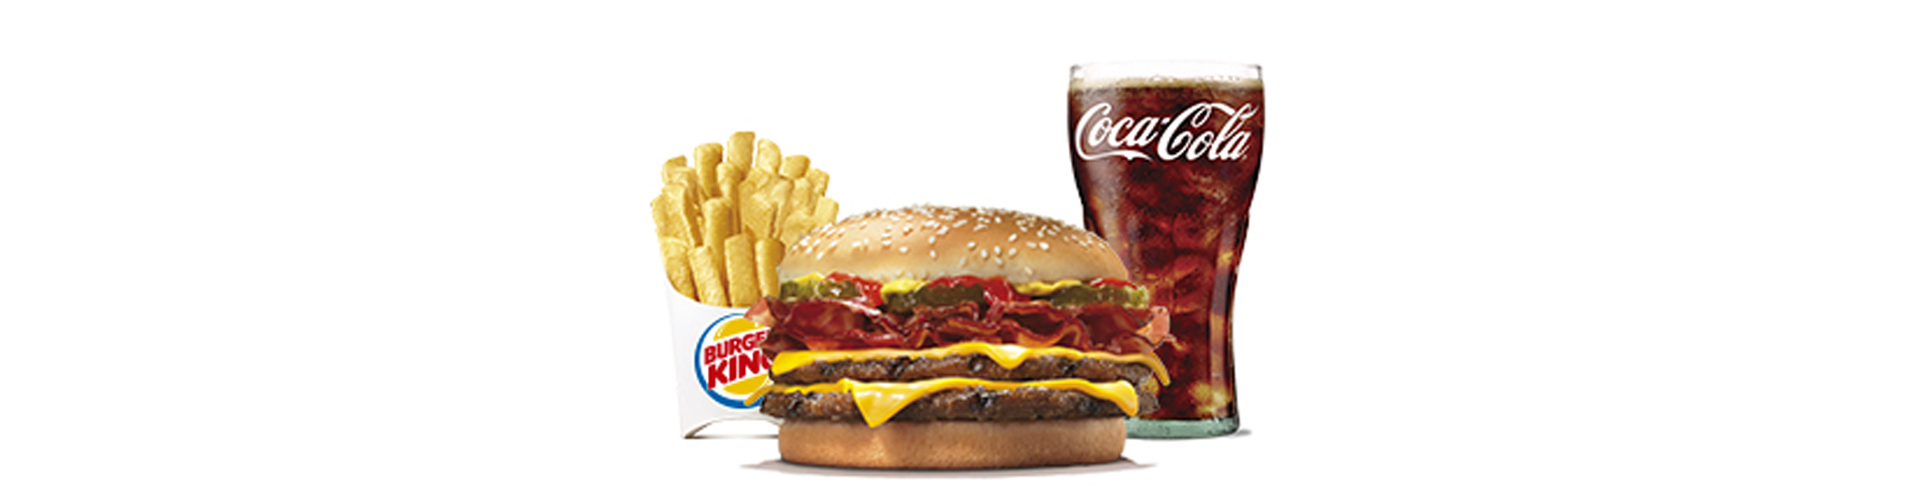 menu-doble-cheese-bacon-foodbkbcnt1pd-40001718-cocacola-light-aros